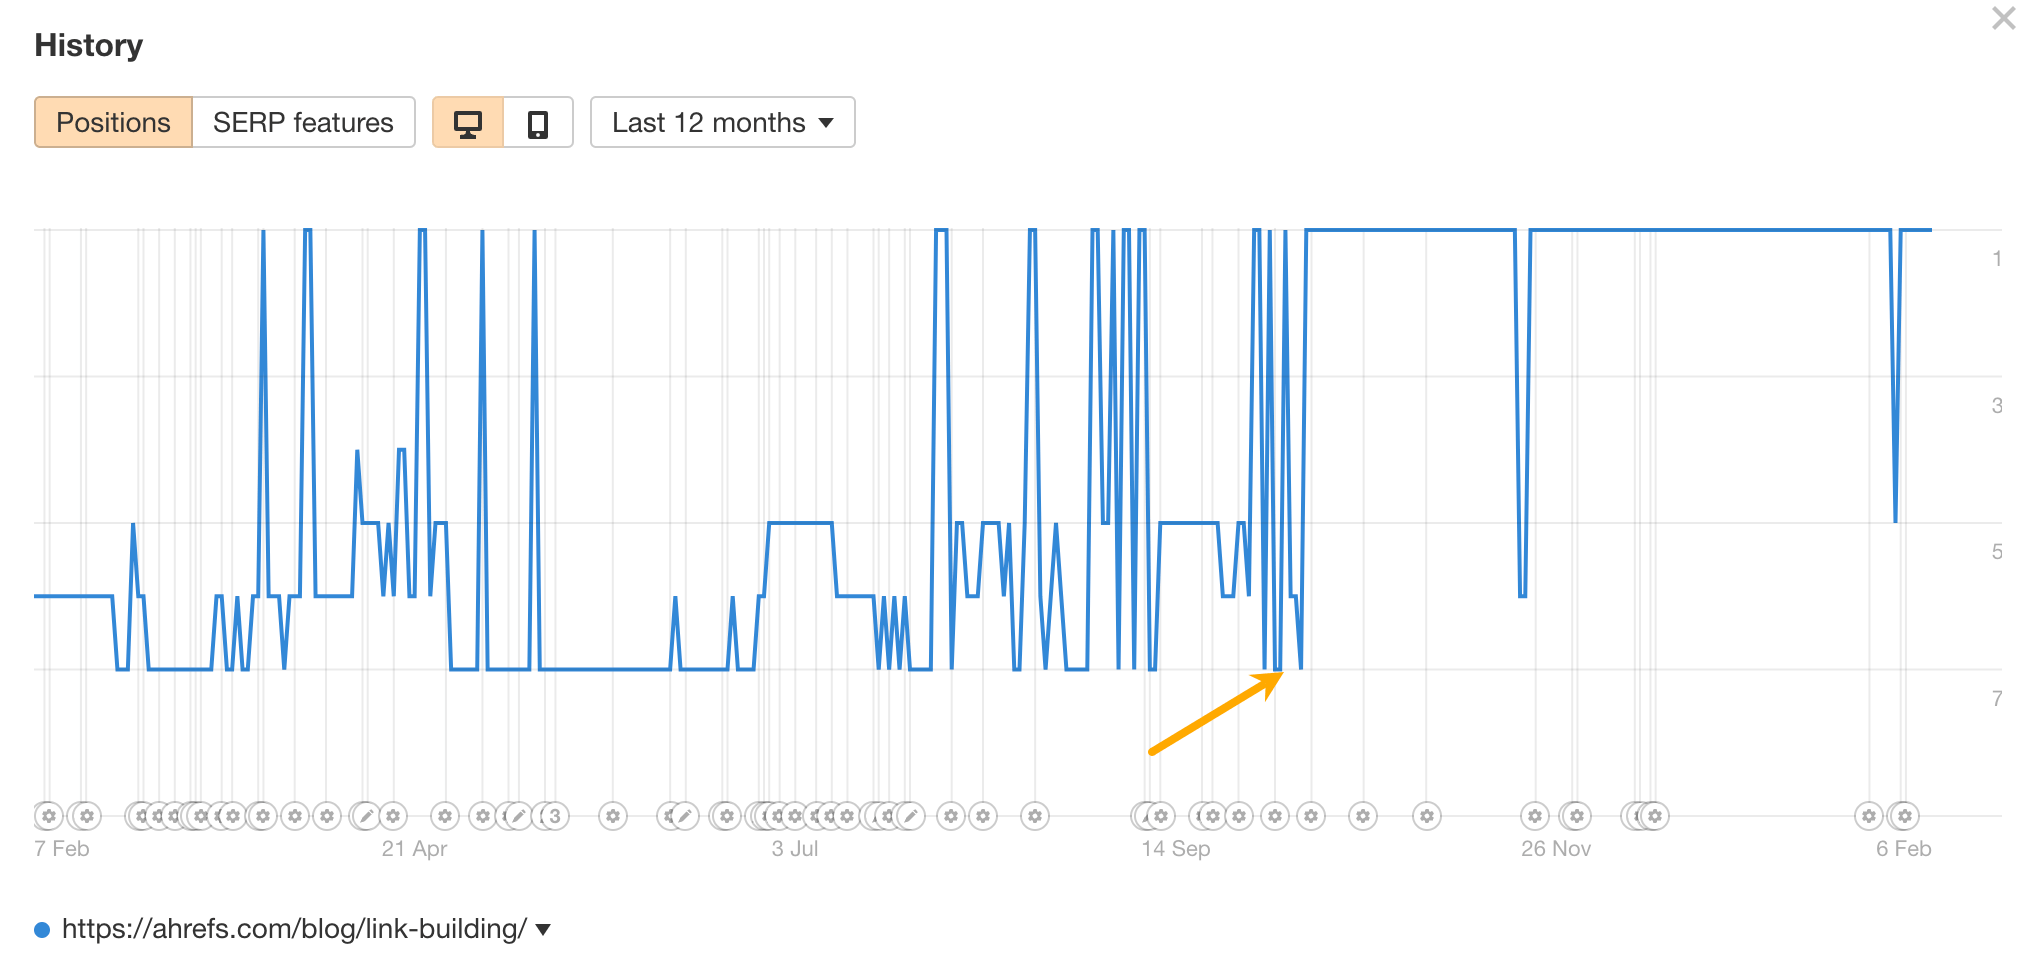 Position history graph in Ahrefs.